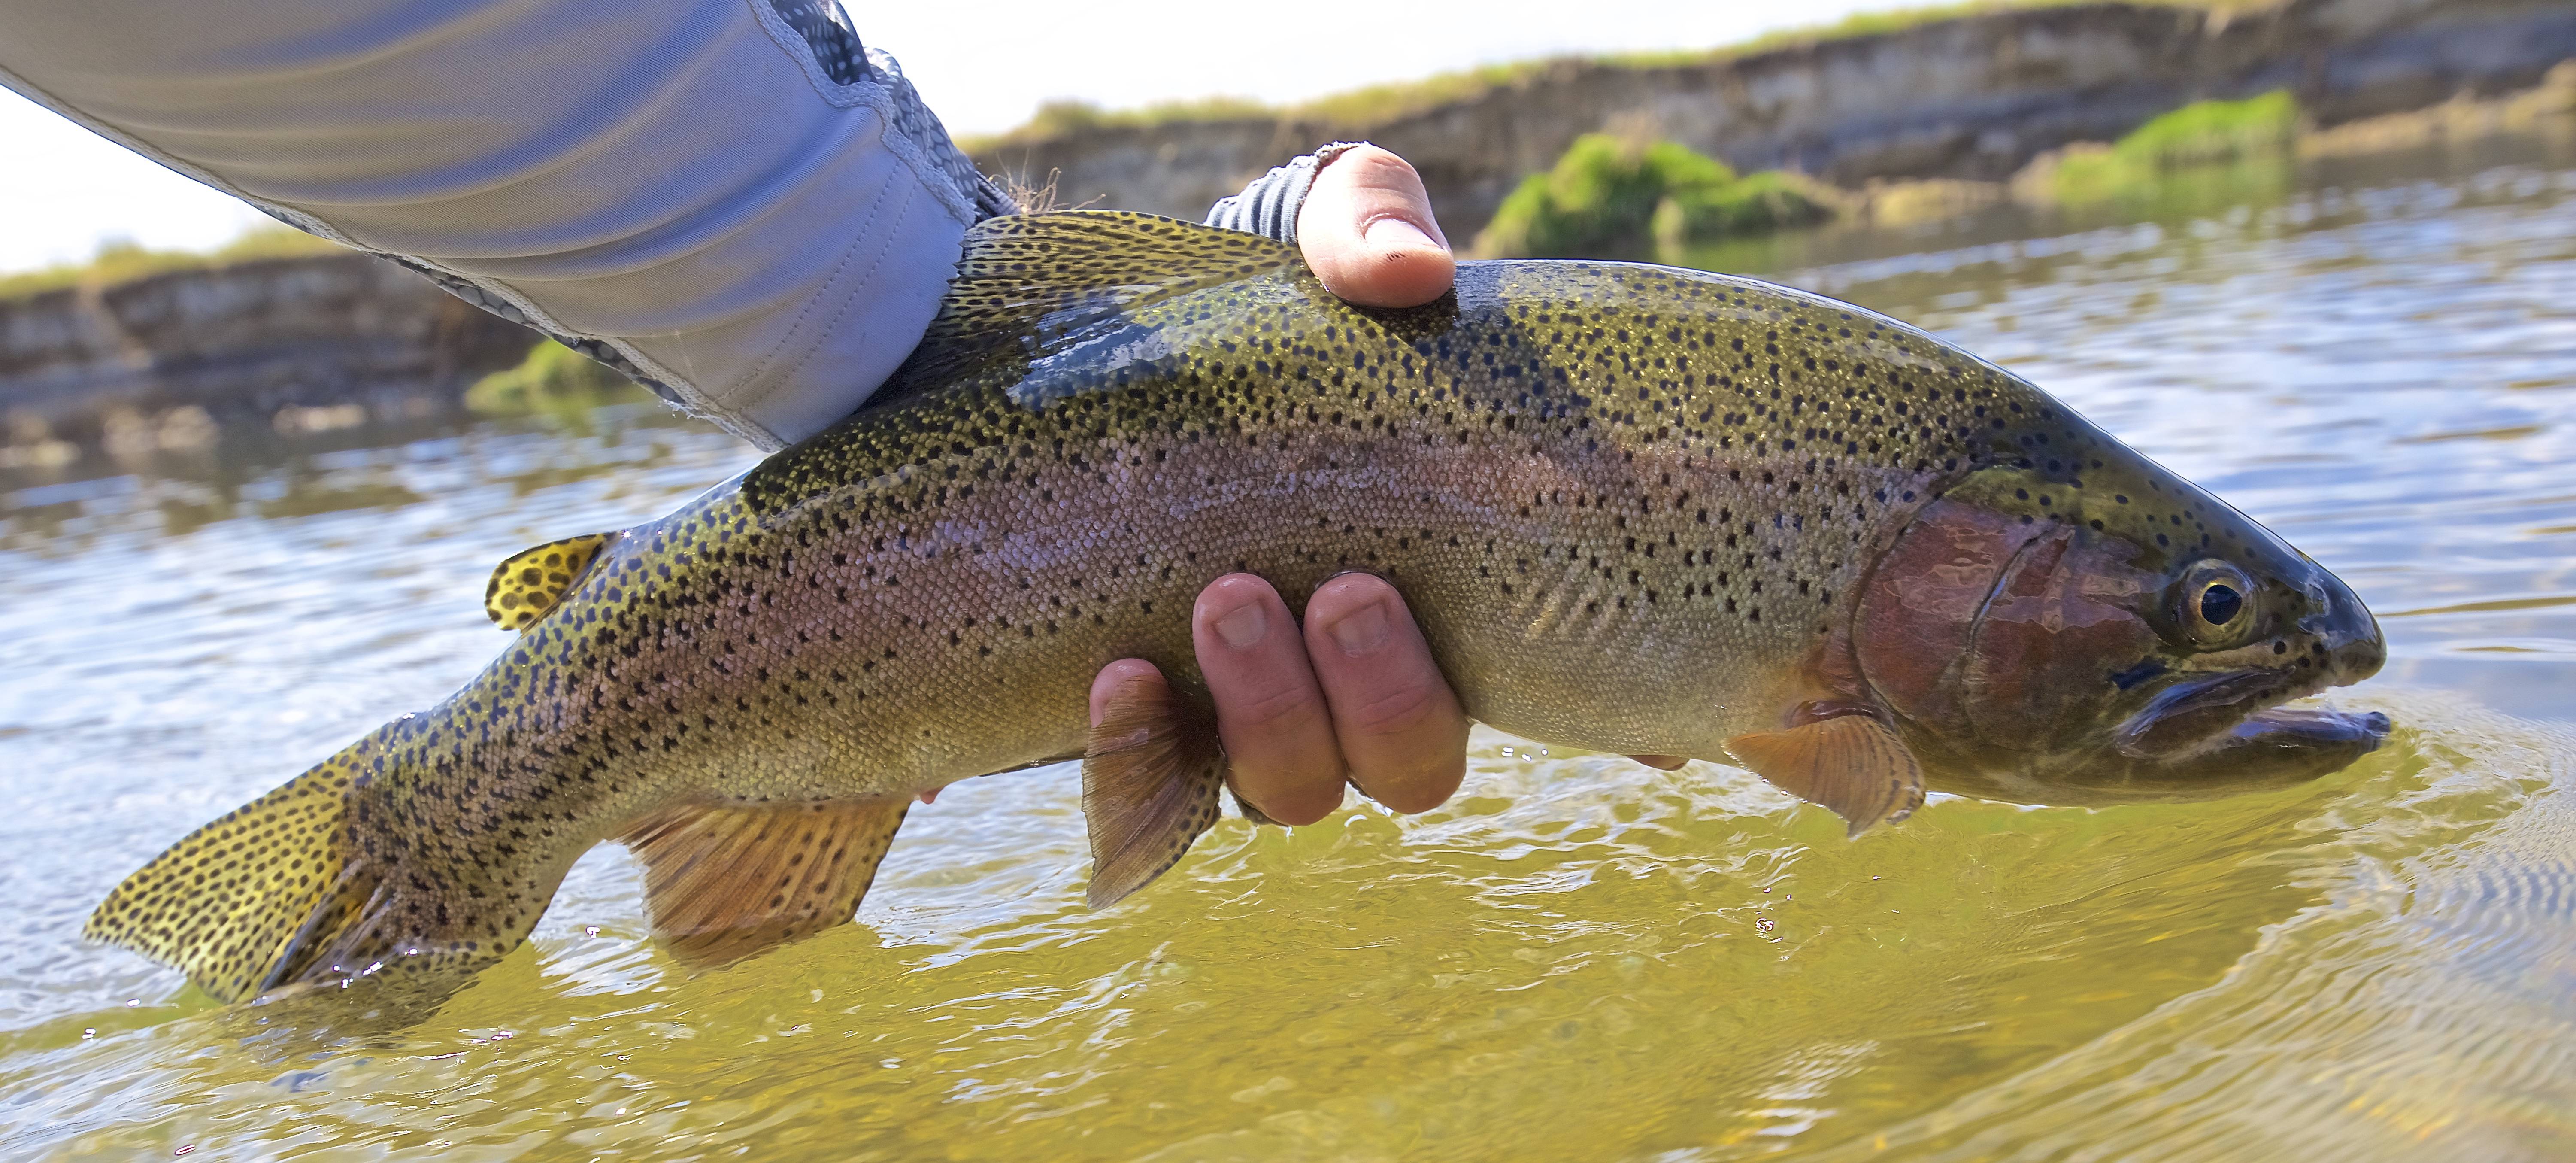 Green River Wyoming Fishing releasing a trout